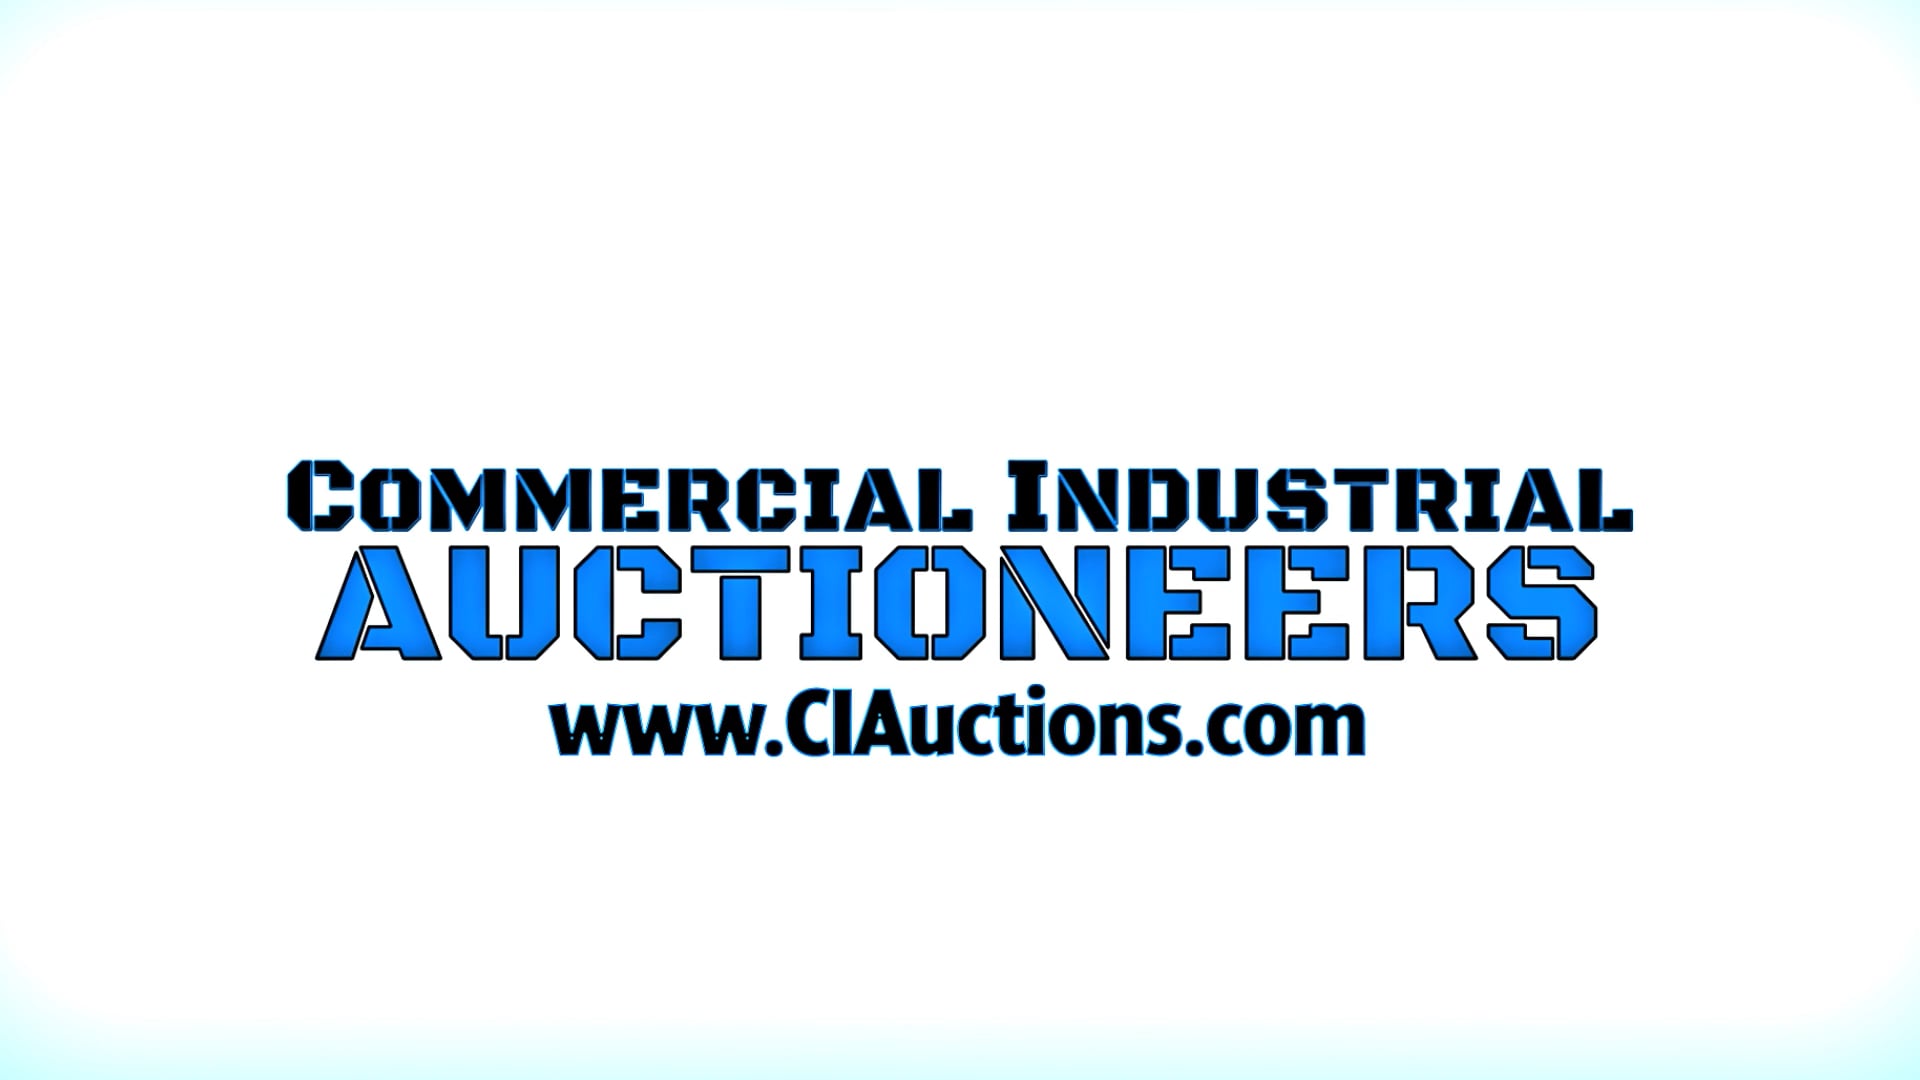 Commercial Industrial Auctioneers